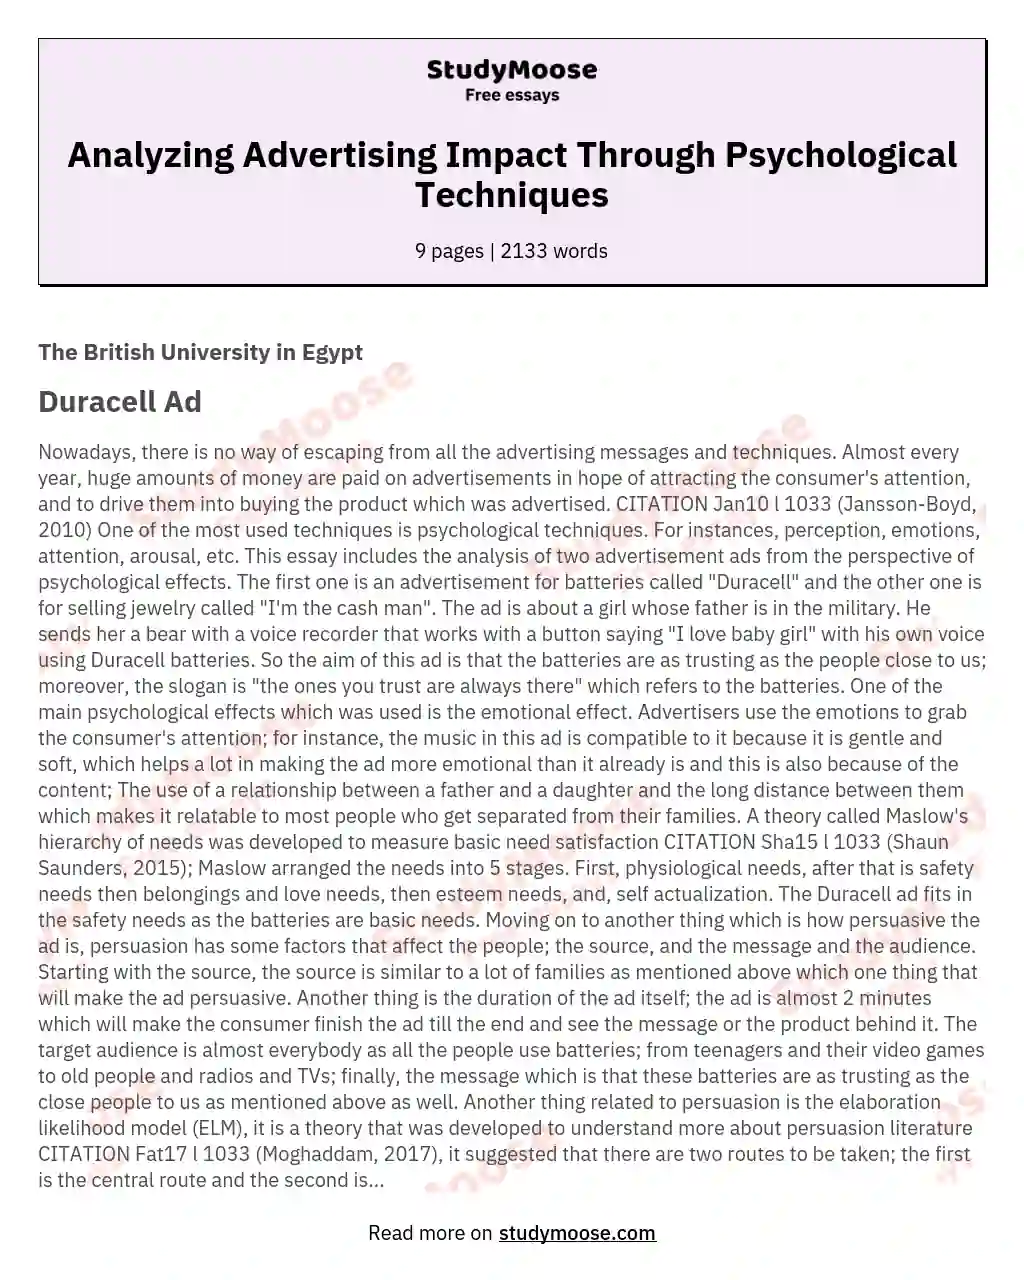 Analyzing Advertising Impact Through Psychological Techniques essay